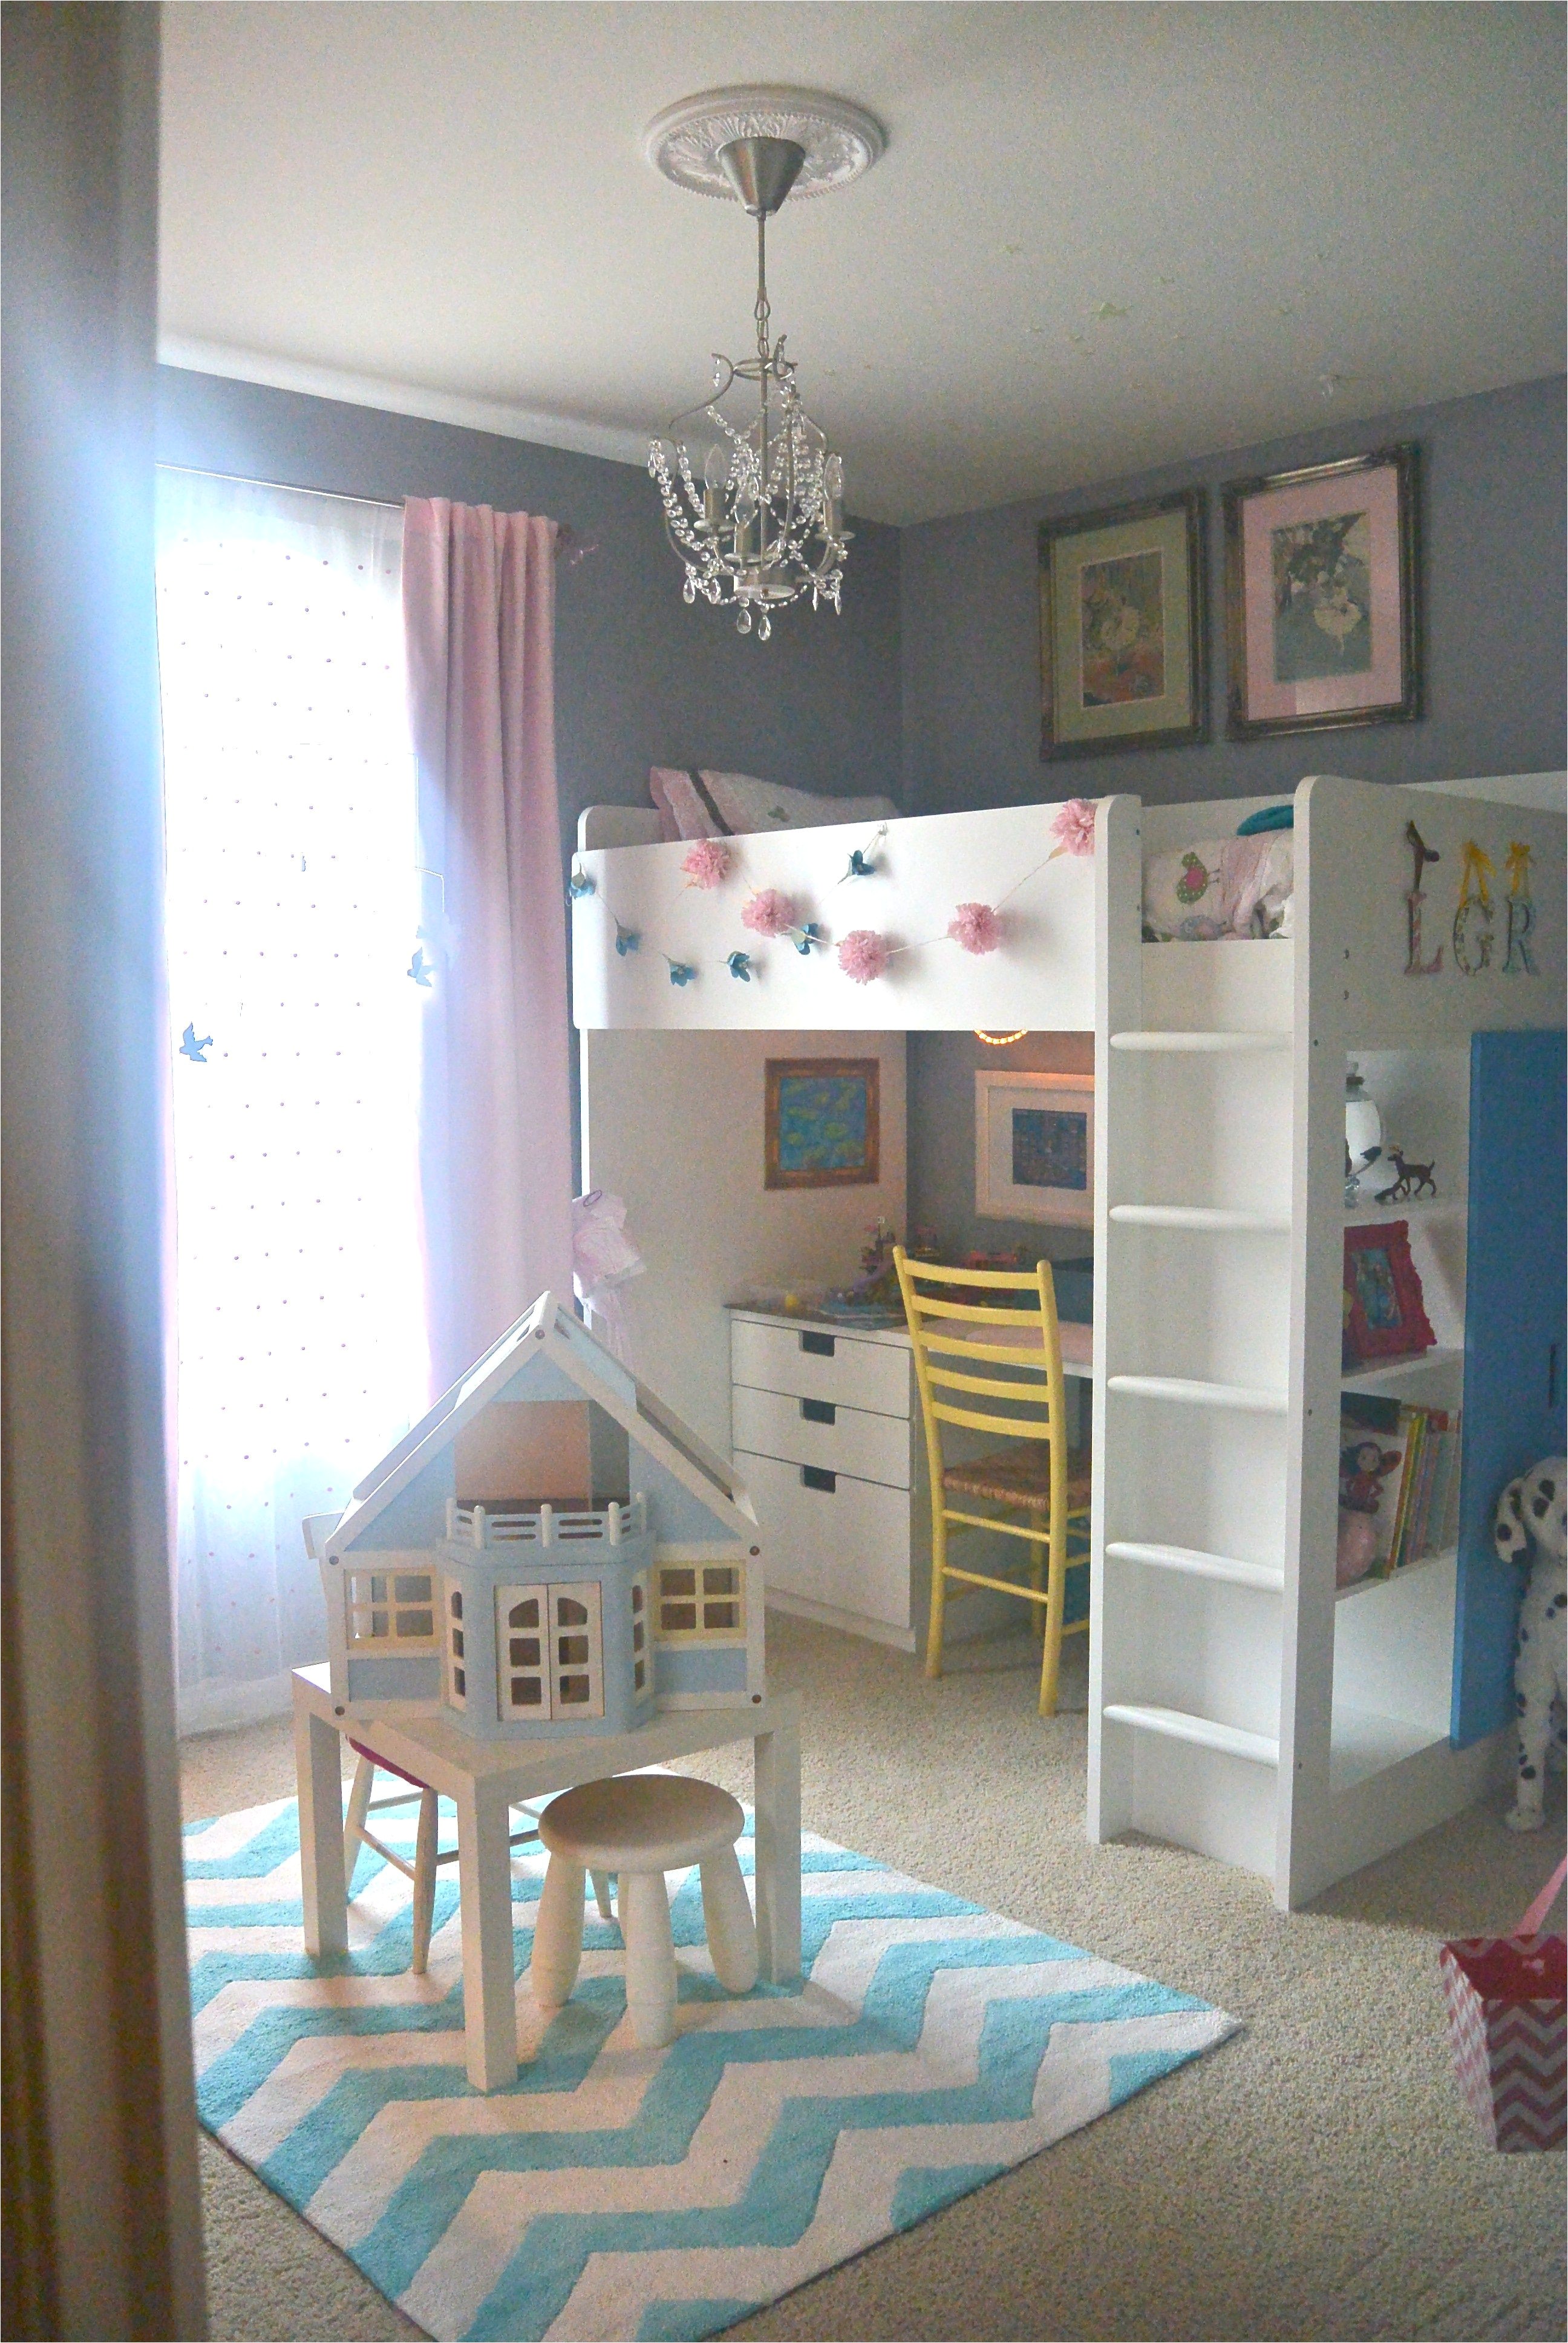 Ikea Stuva Loft Bed Hack Awesome Idea for My Older Daughter Maybe Remove the Desk and Put My